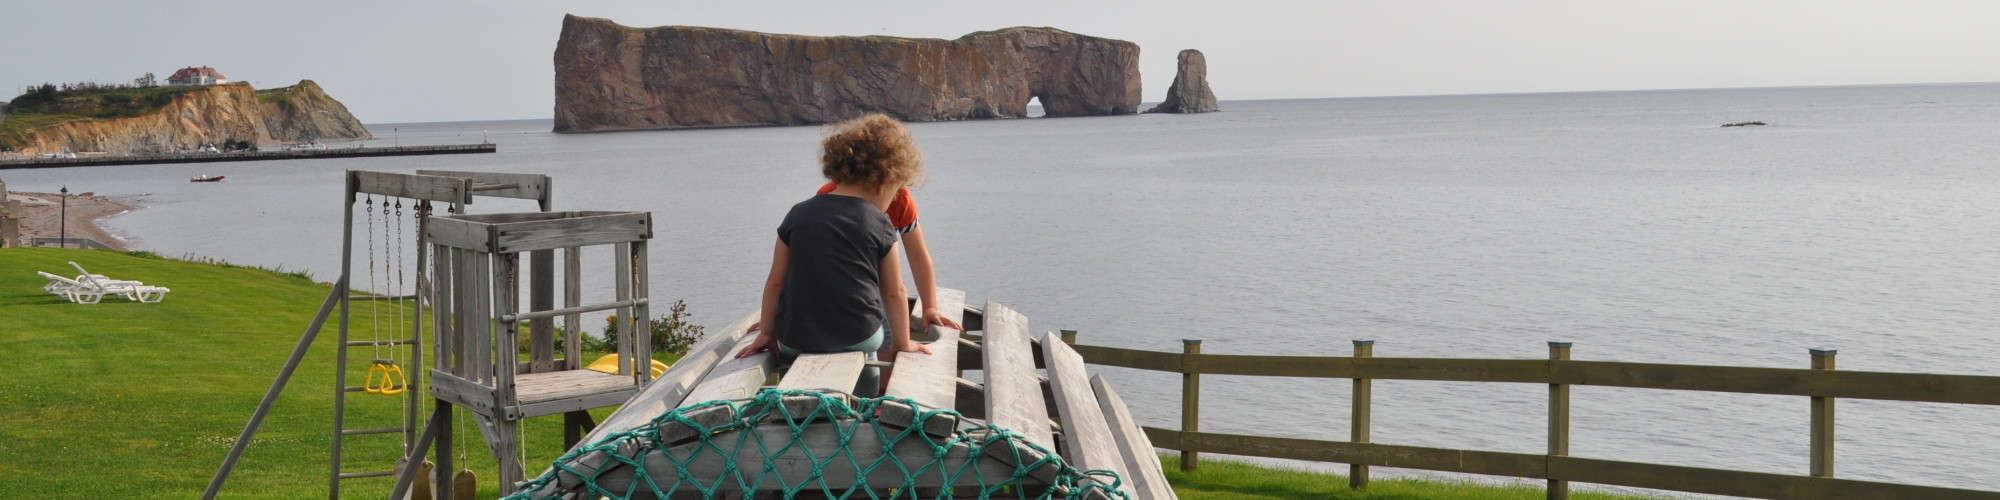 Children playing on an outdoor playground, view of the sea and Percé Rock